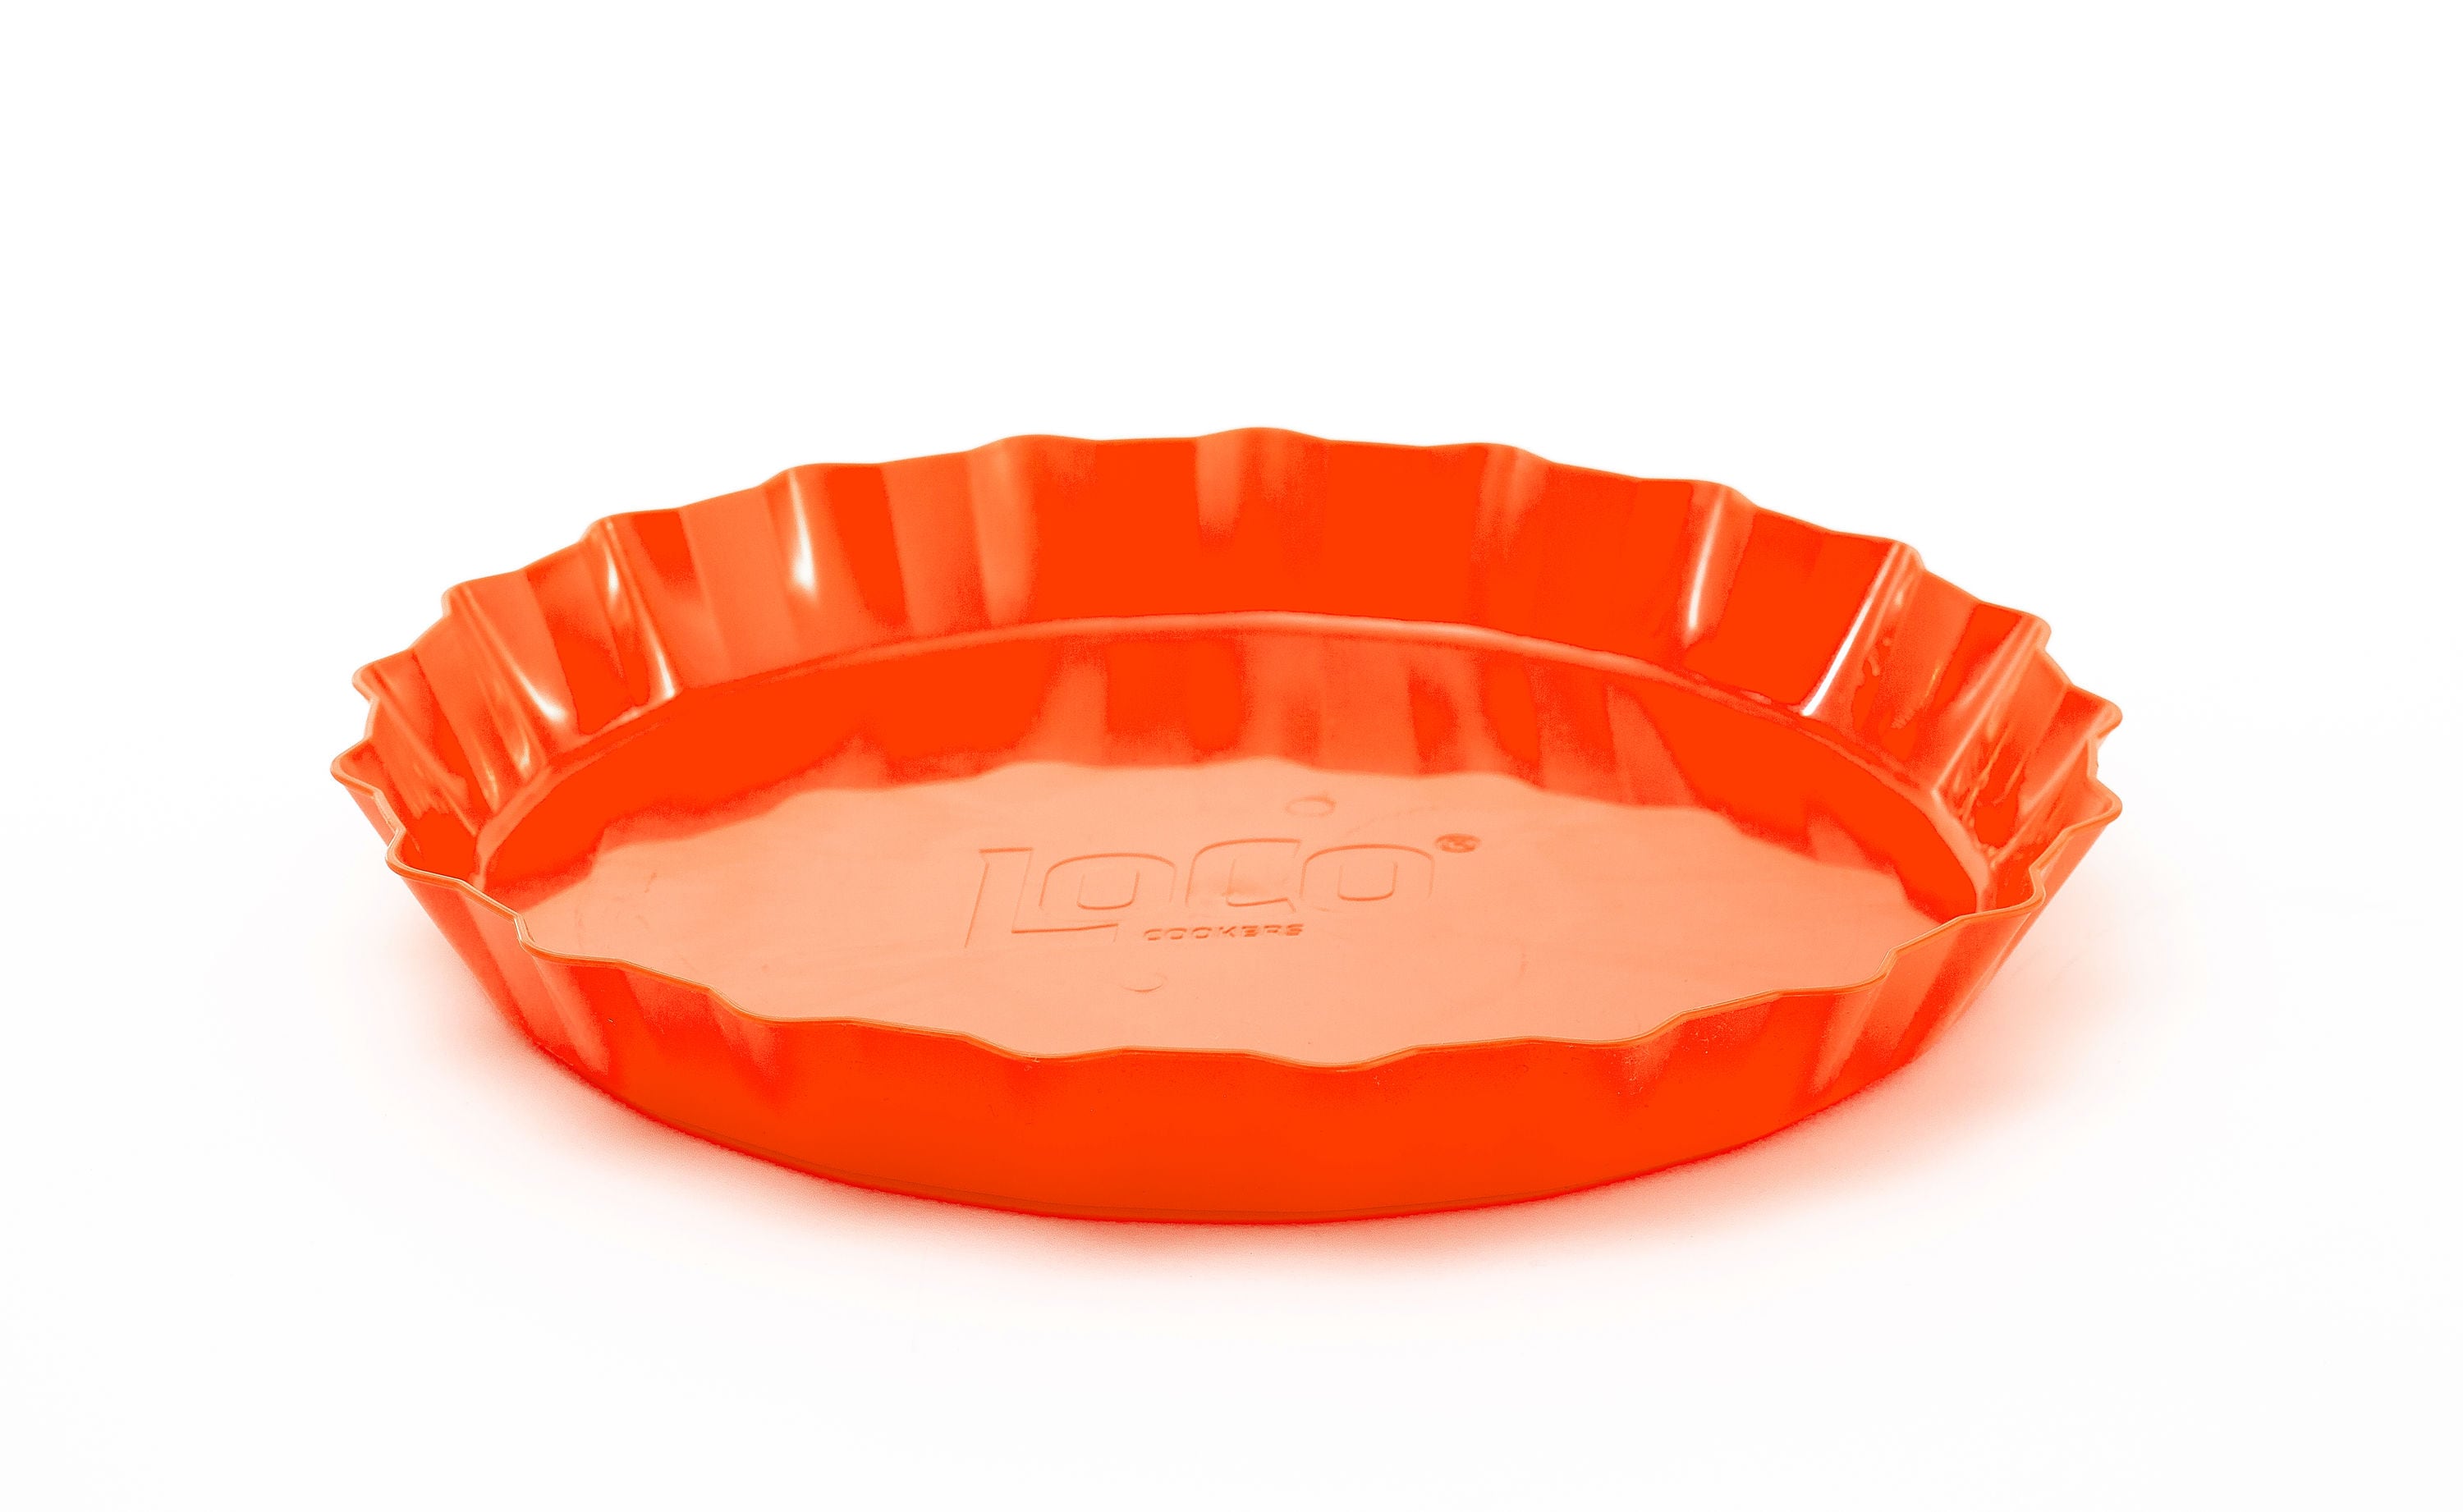 LoCo COOKERS LoCo Party Platters - Orange Melamine Plastic Platter for  Crawfish, Crabs, Shrimp, Boiled Peanuts and More in the Serveware  department at